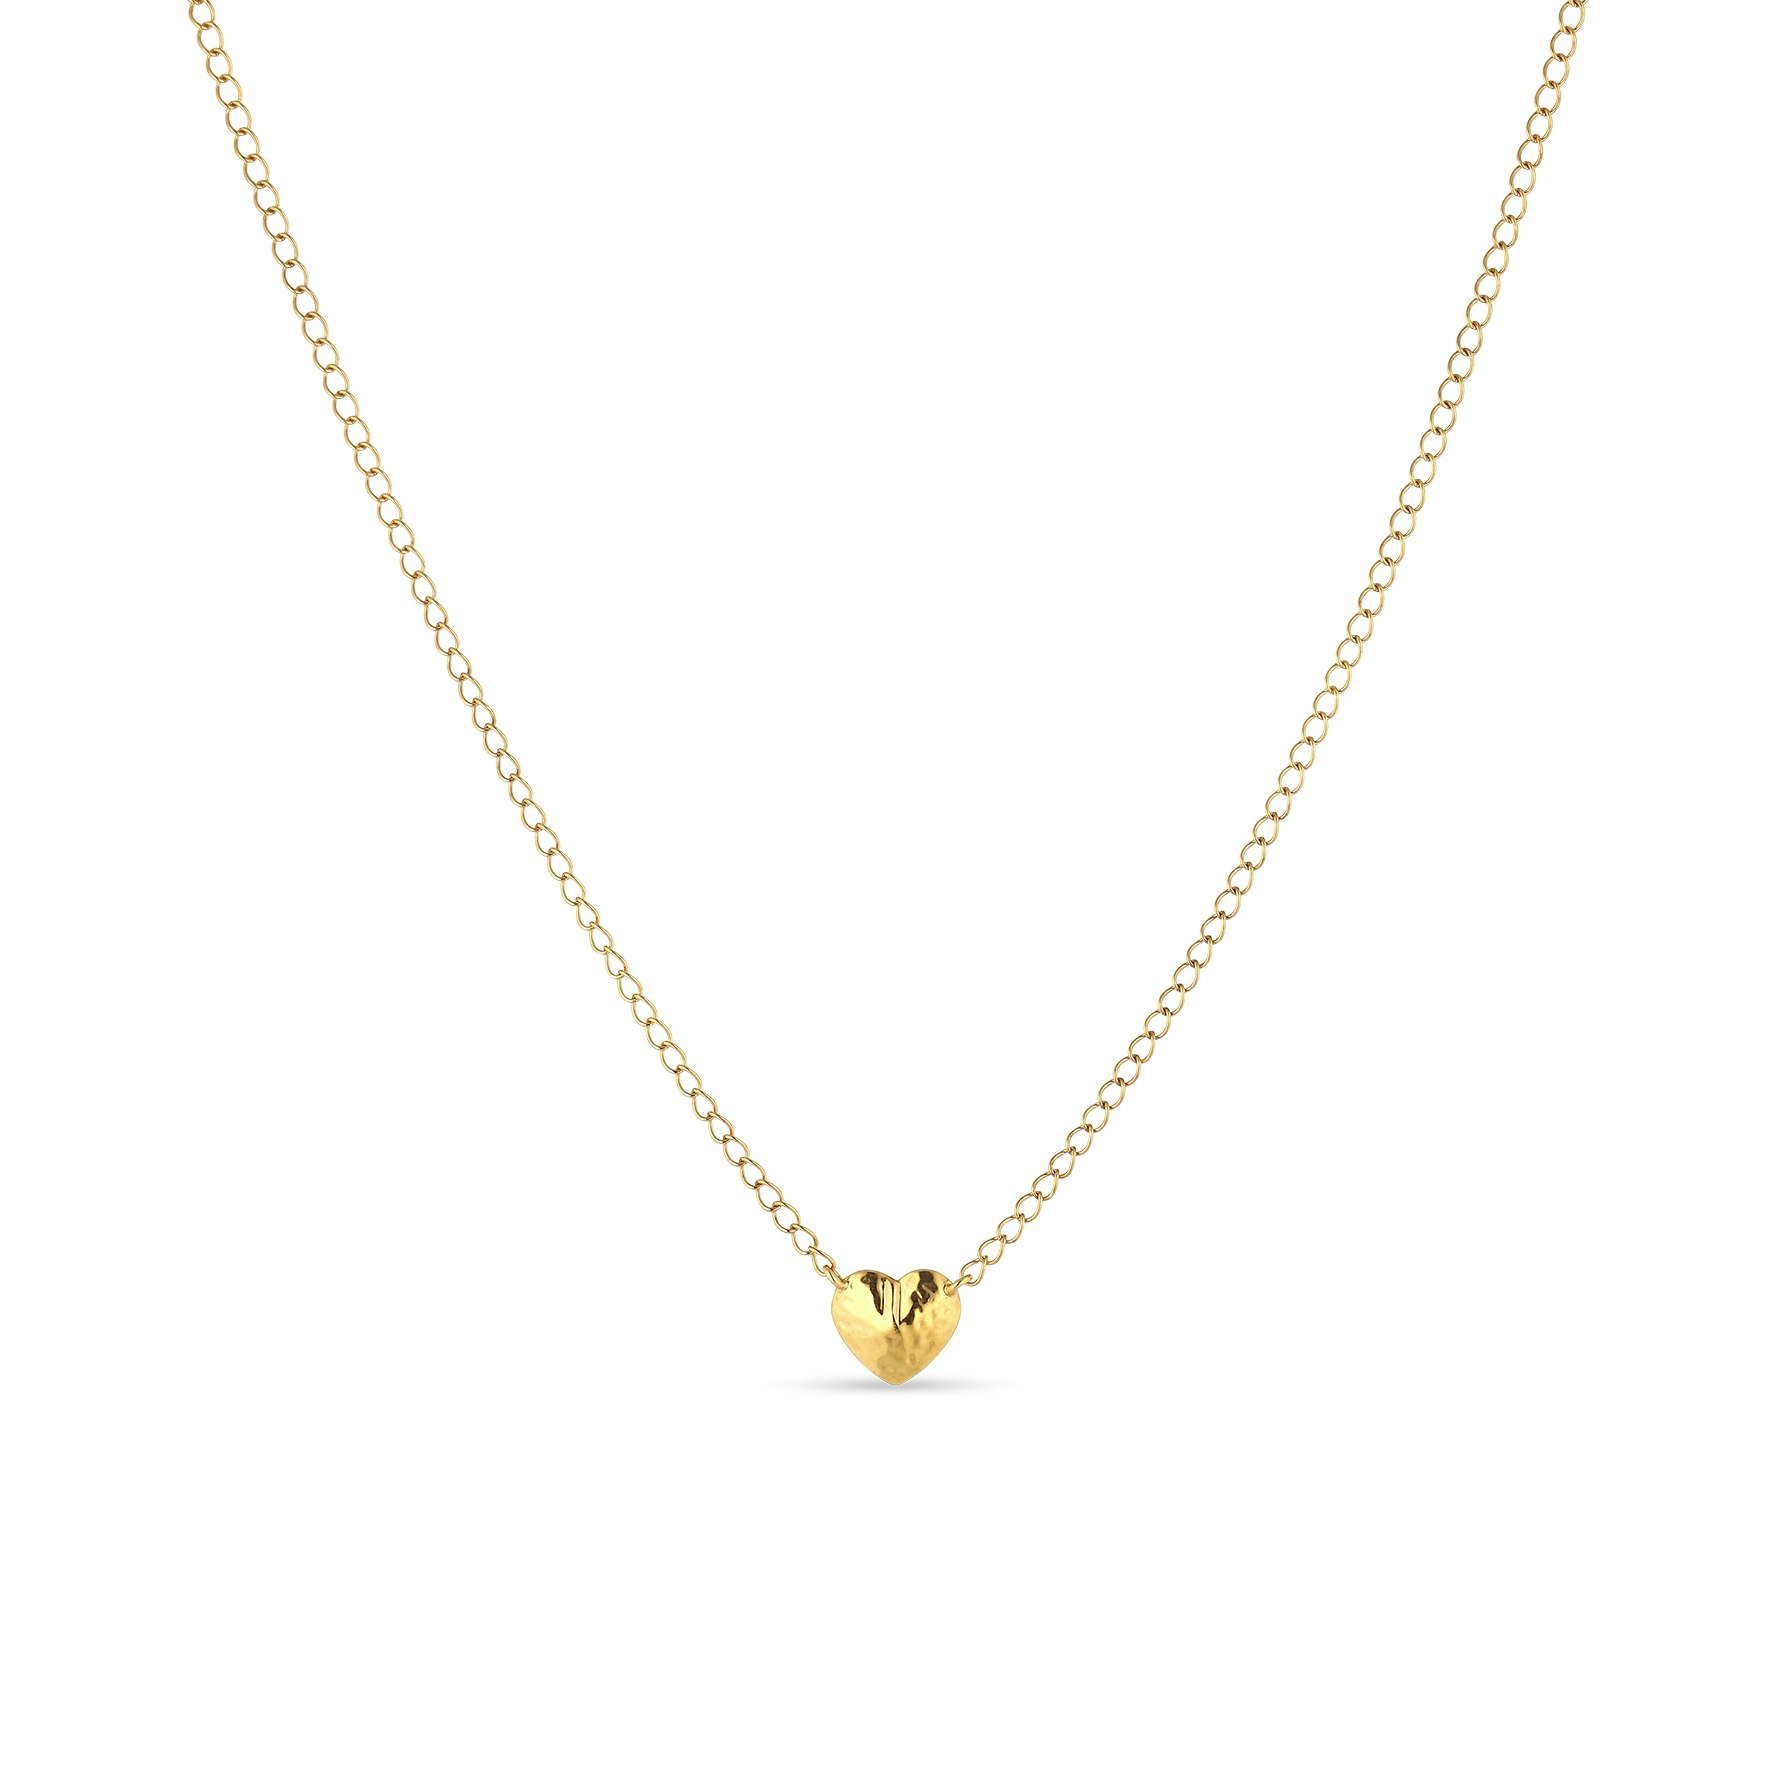 Bruised Heart Necklace from Jane Kønig in Goldplated-Silver Sterling 925